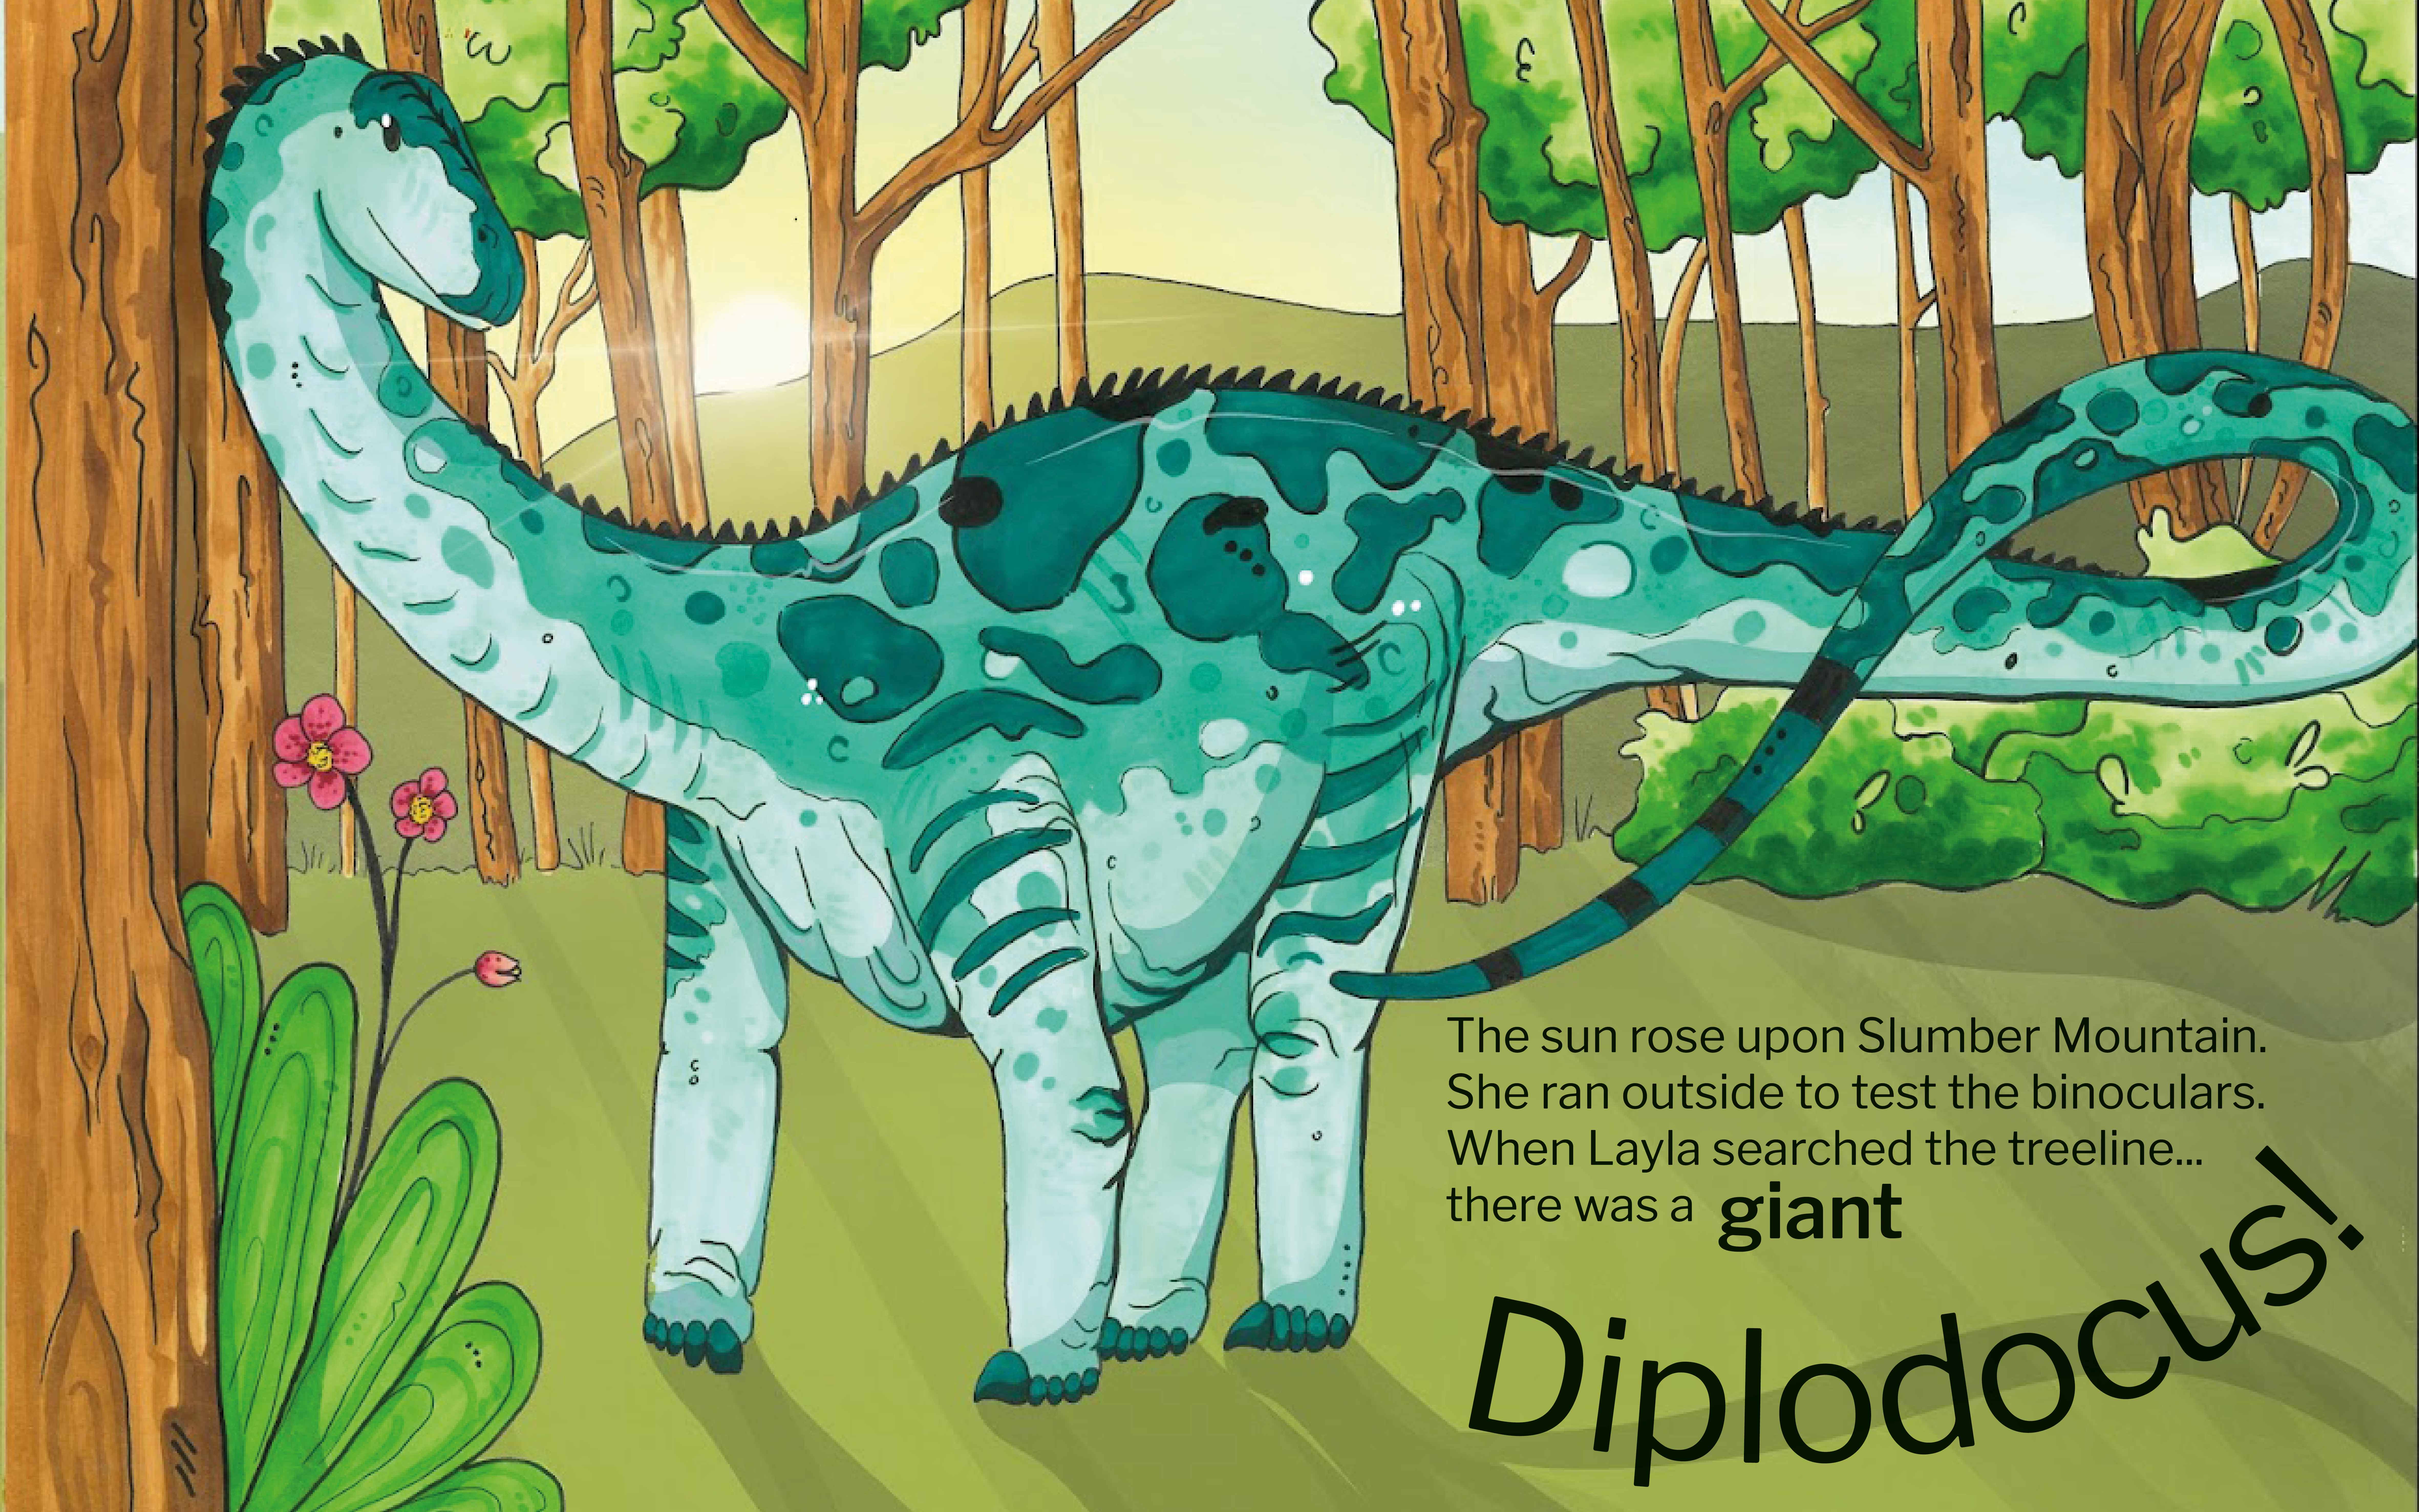 Illustration by Beth Lester showing a blue dinosaur in a forest.